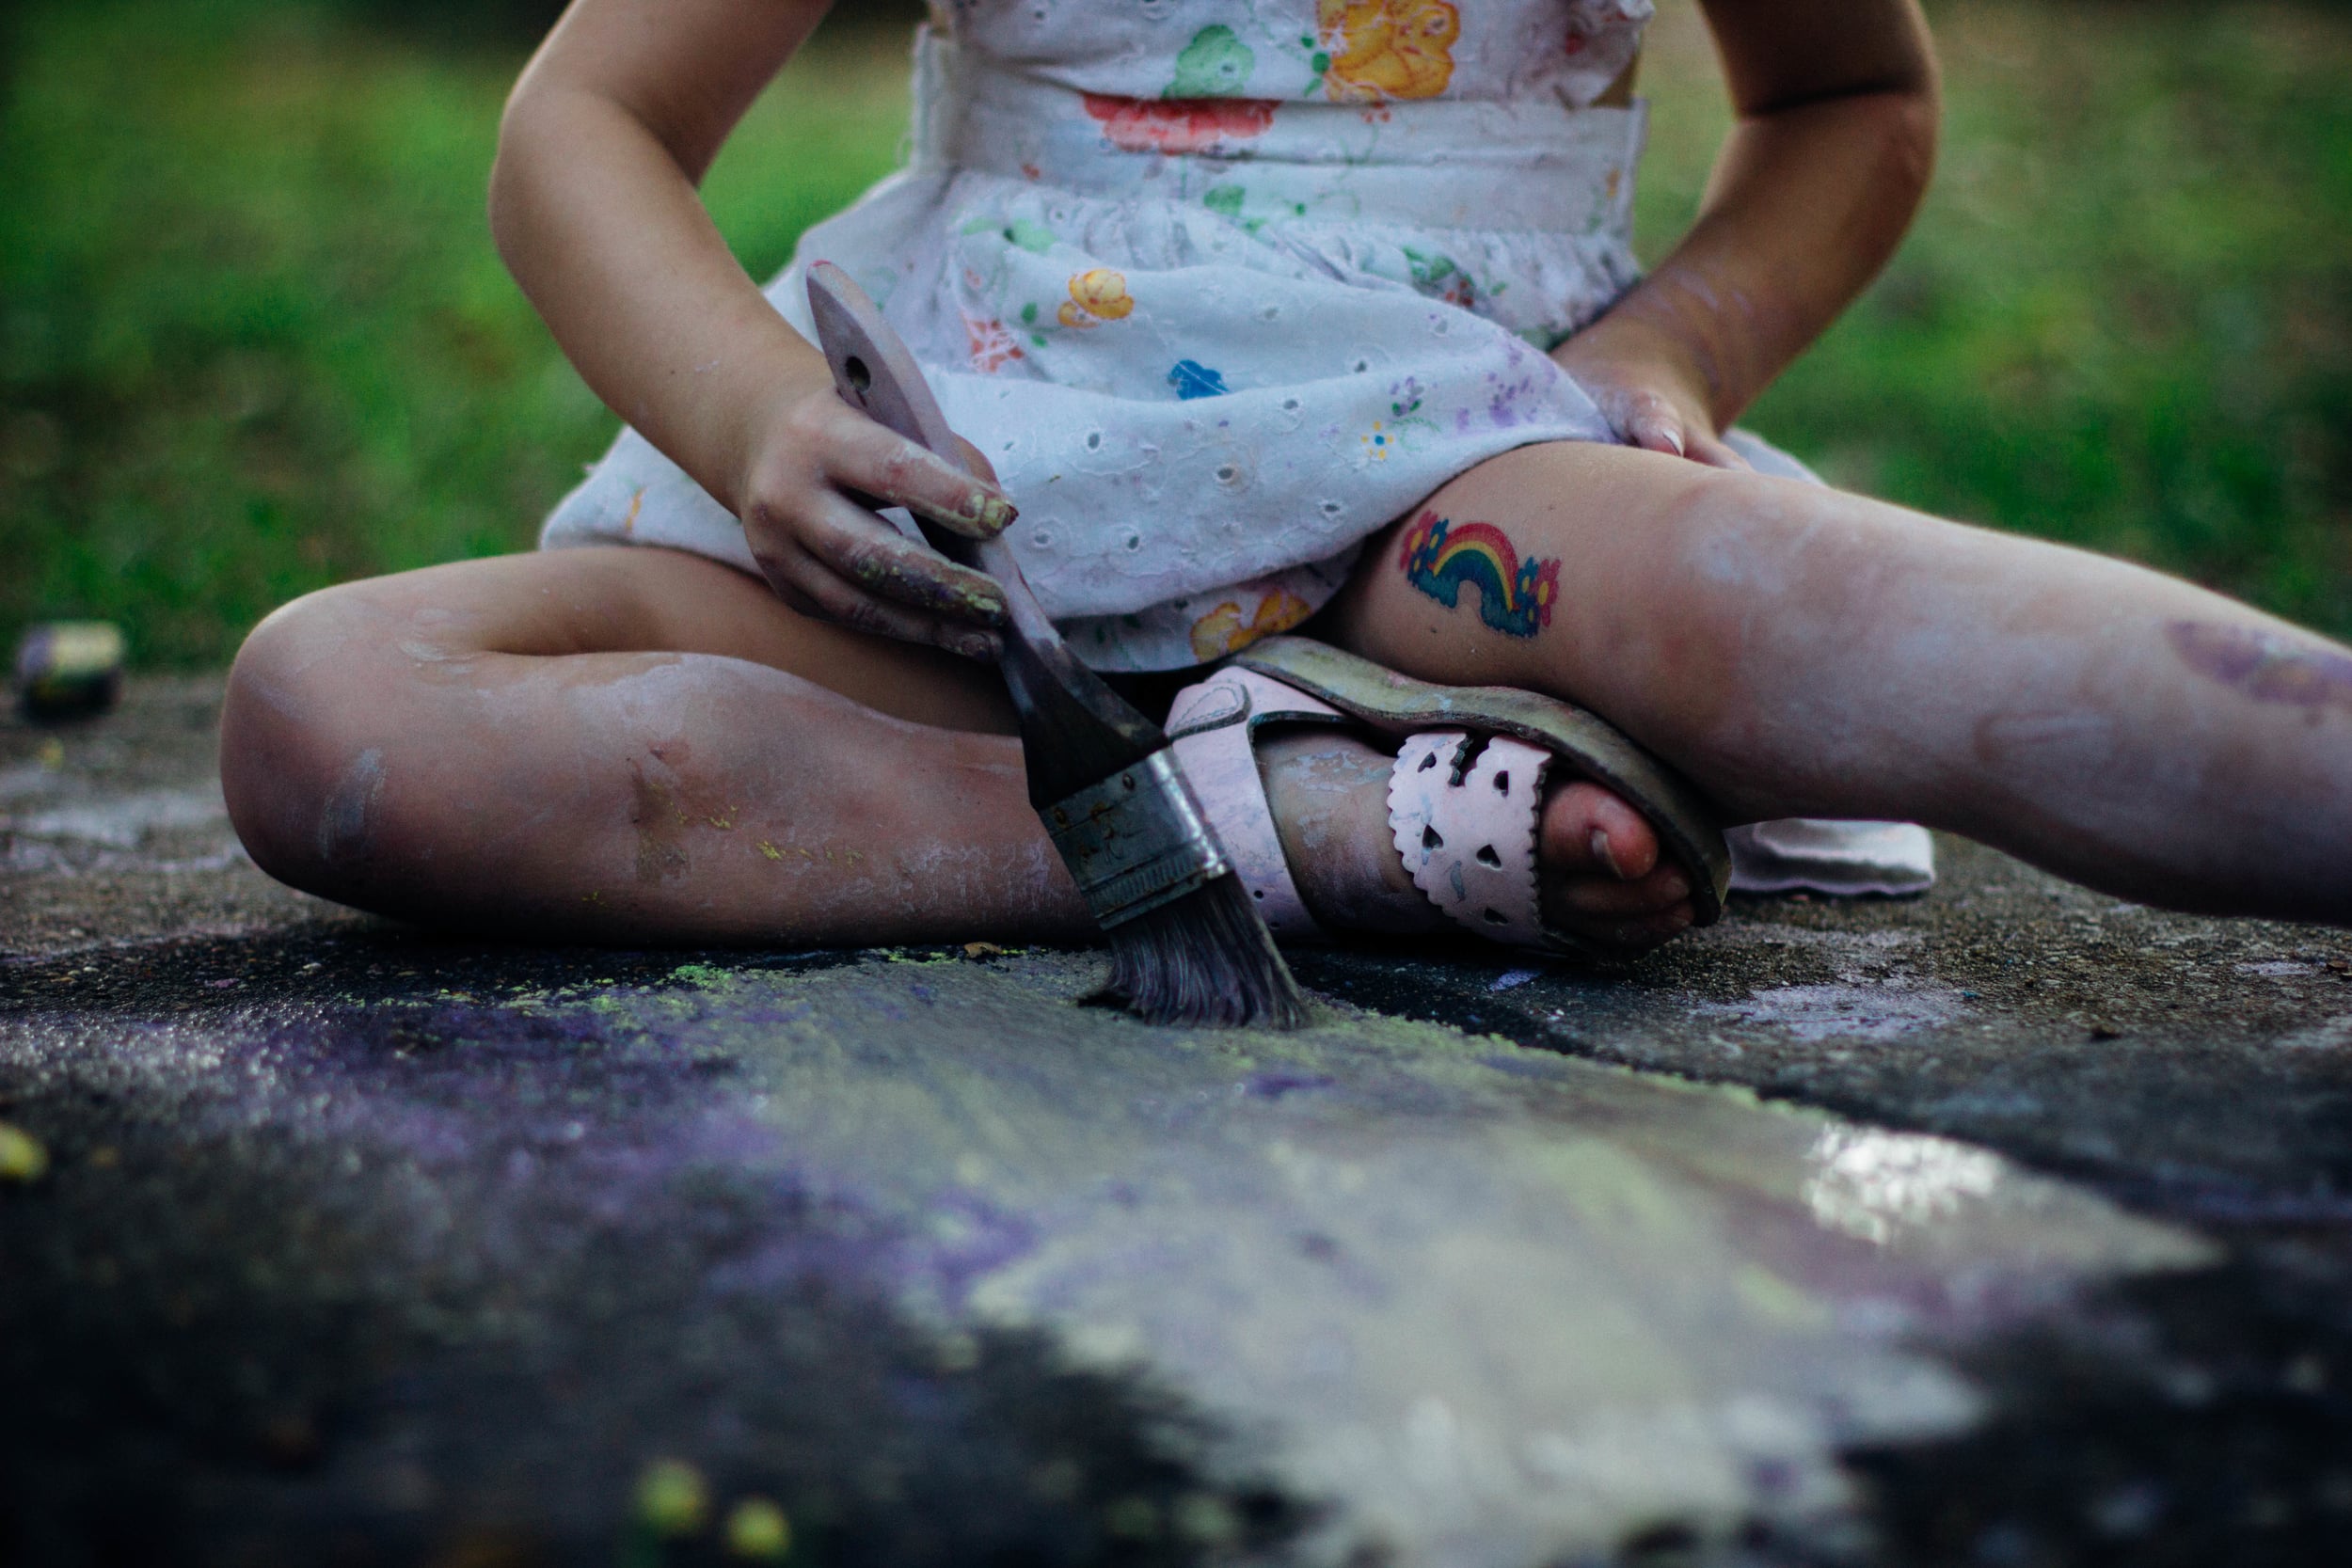 girl painting on a sidewalk with a rainbow tattoo